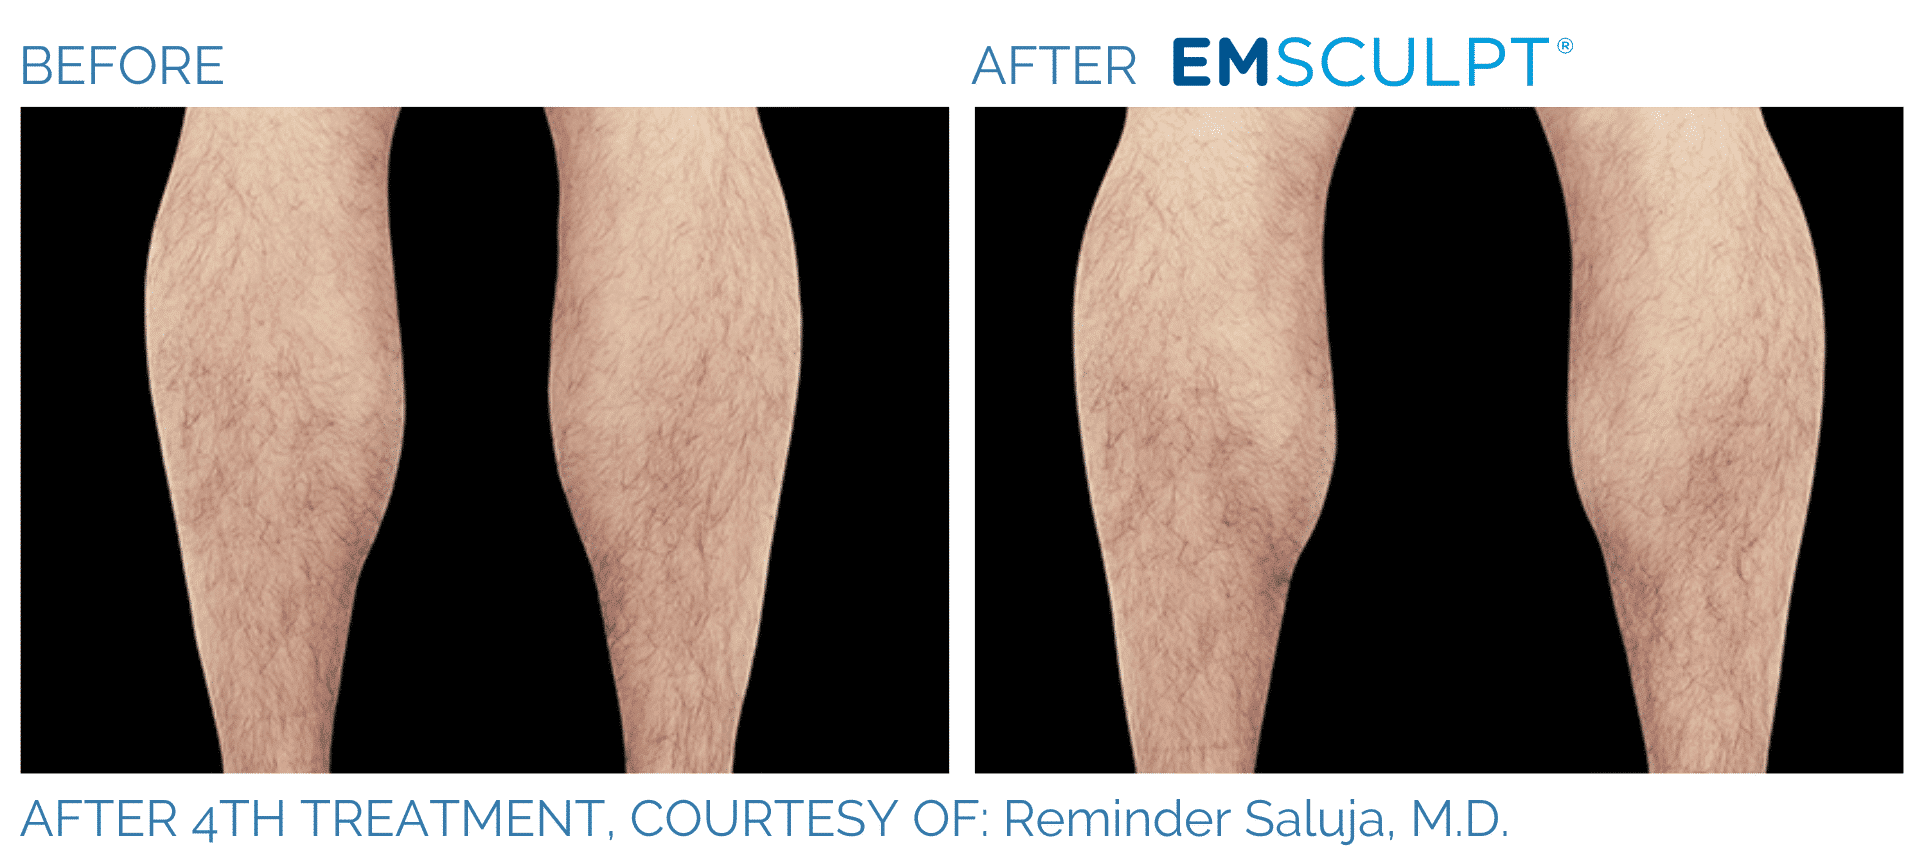 Emsculpt NEO Before and After Treament